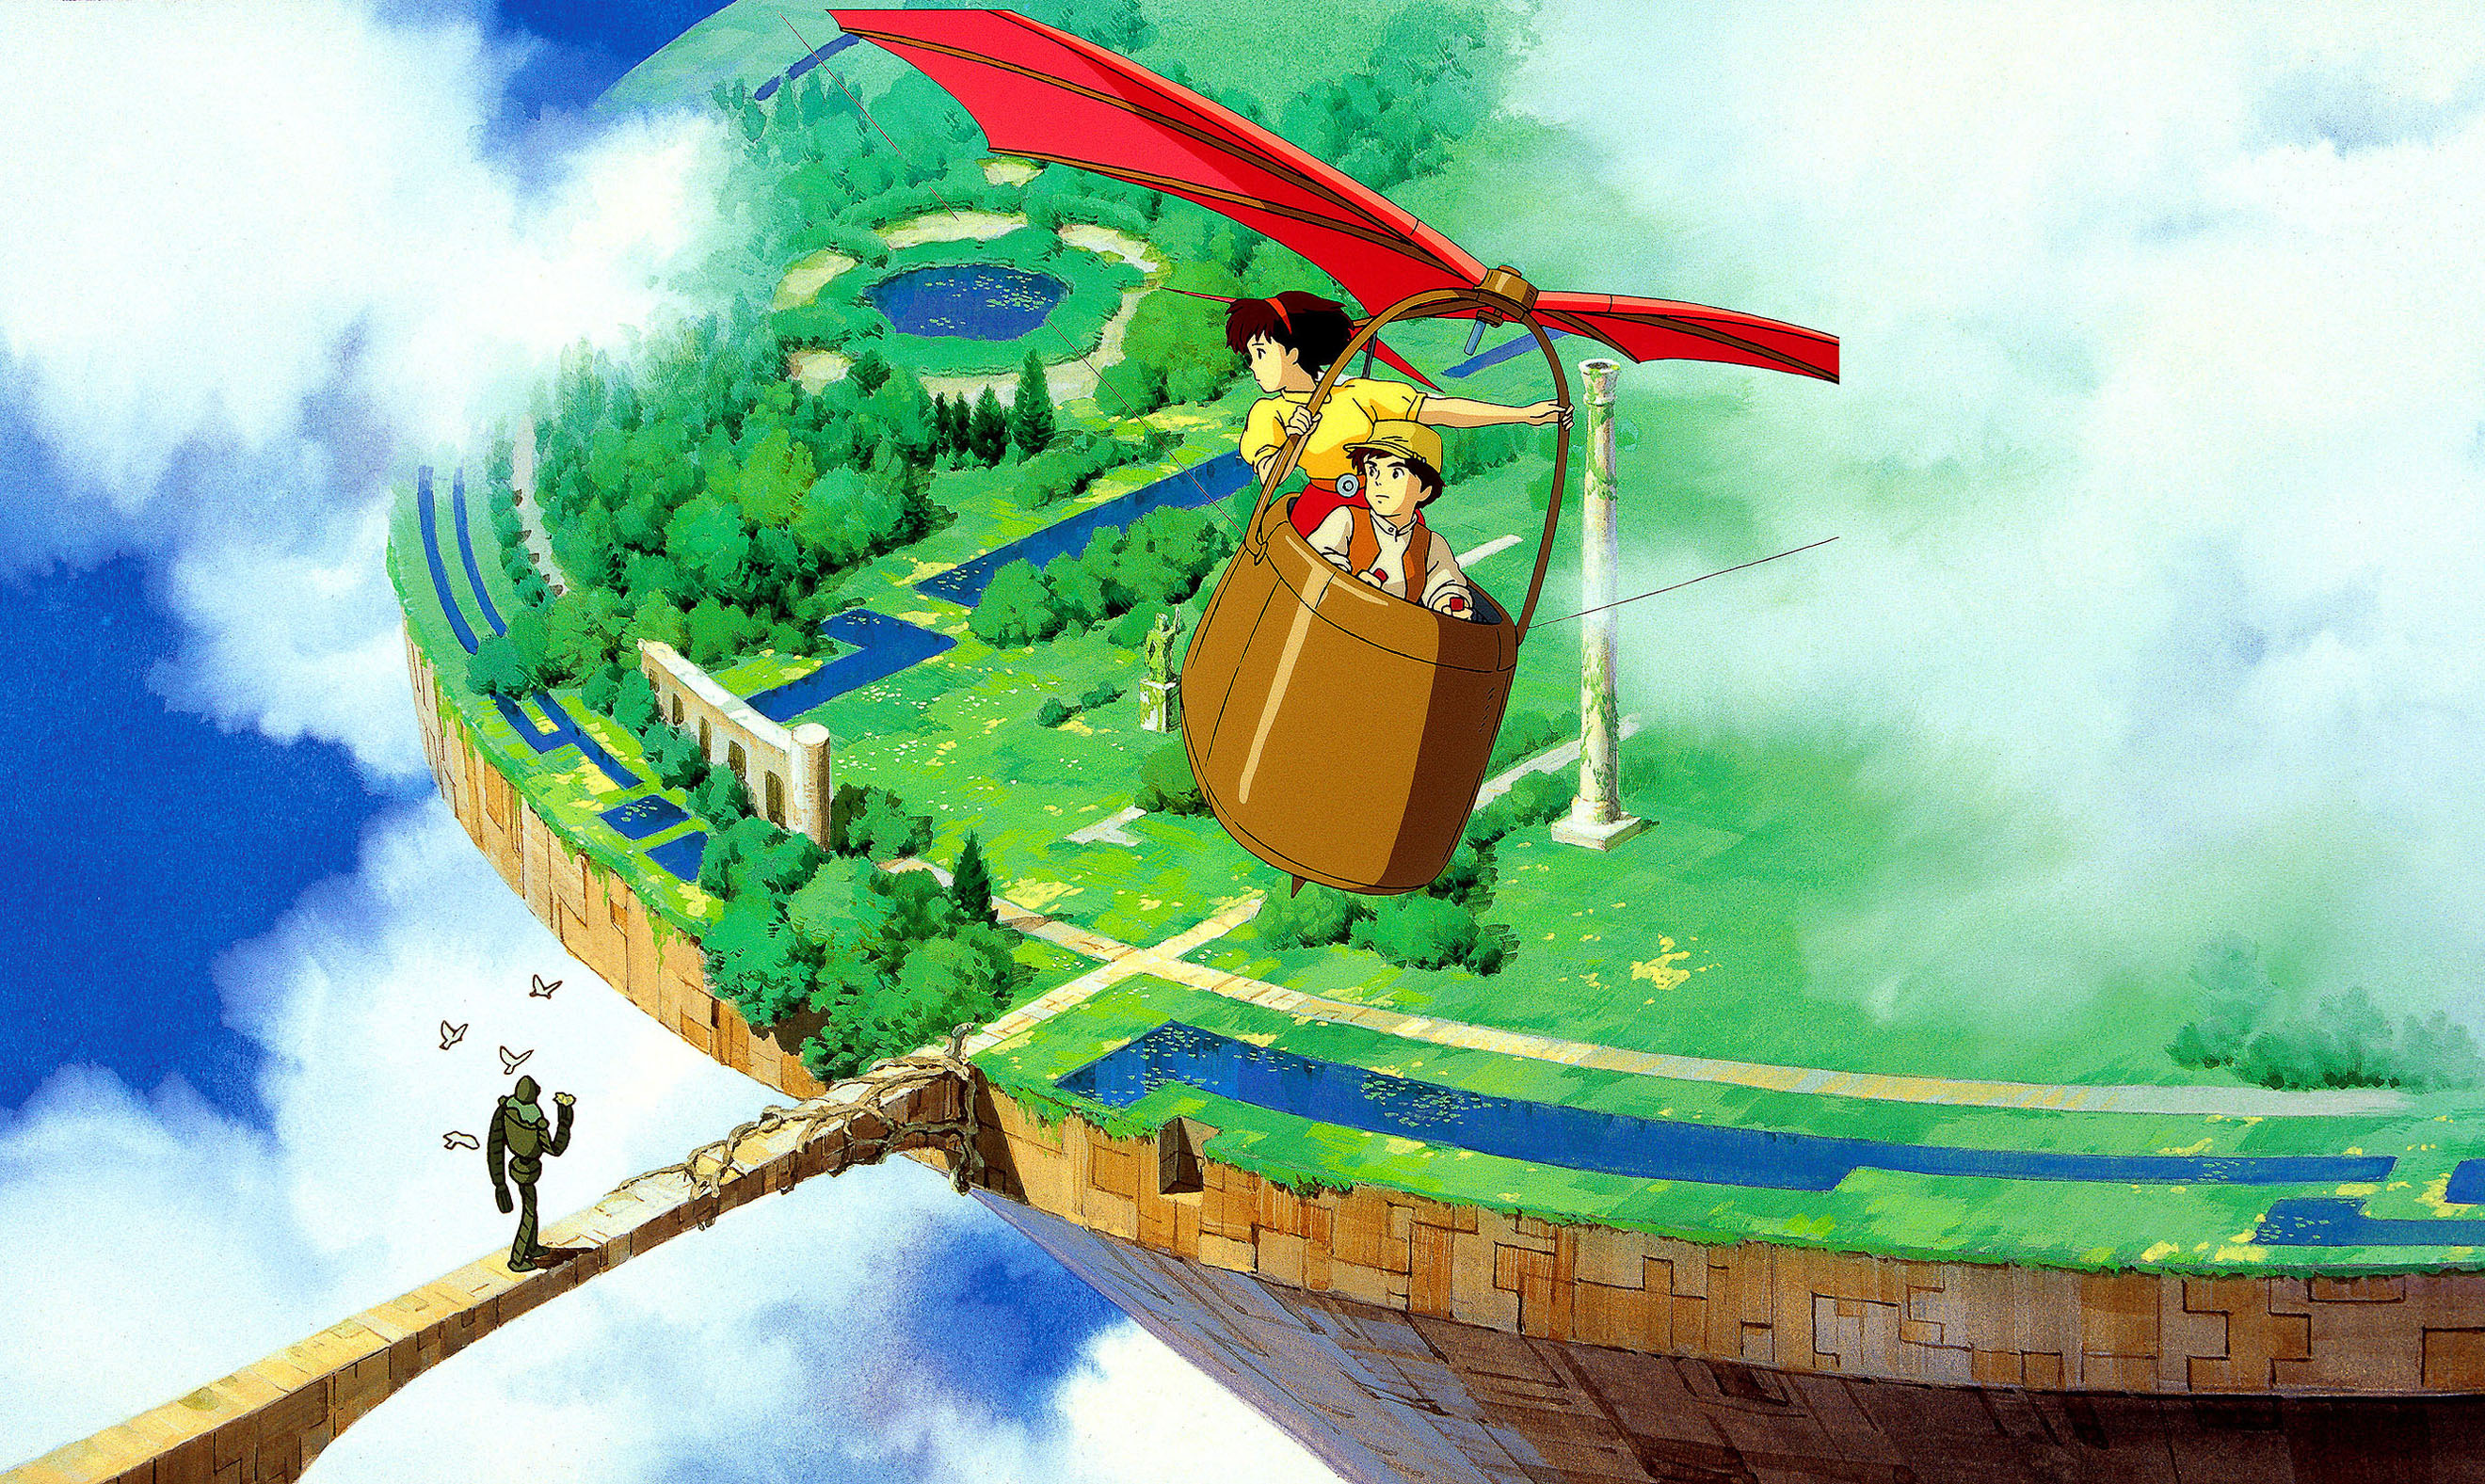 A girl and a boy drawn in anime style fly a simple flying machine above a flying city shrouded in clouds. Below, a giant robot walks across a sky bridge